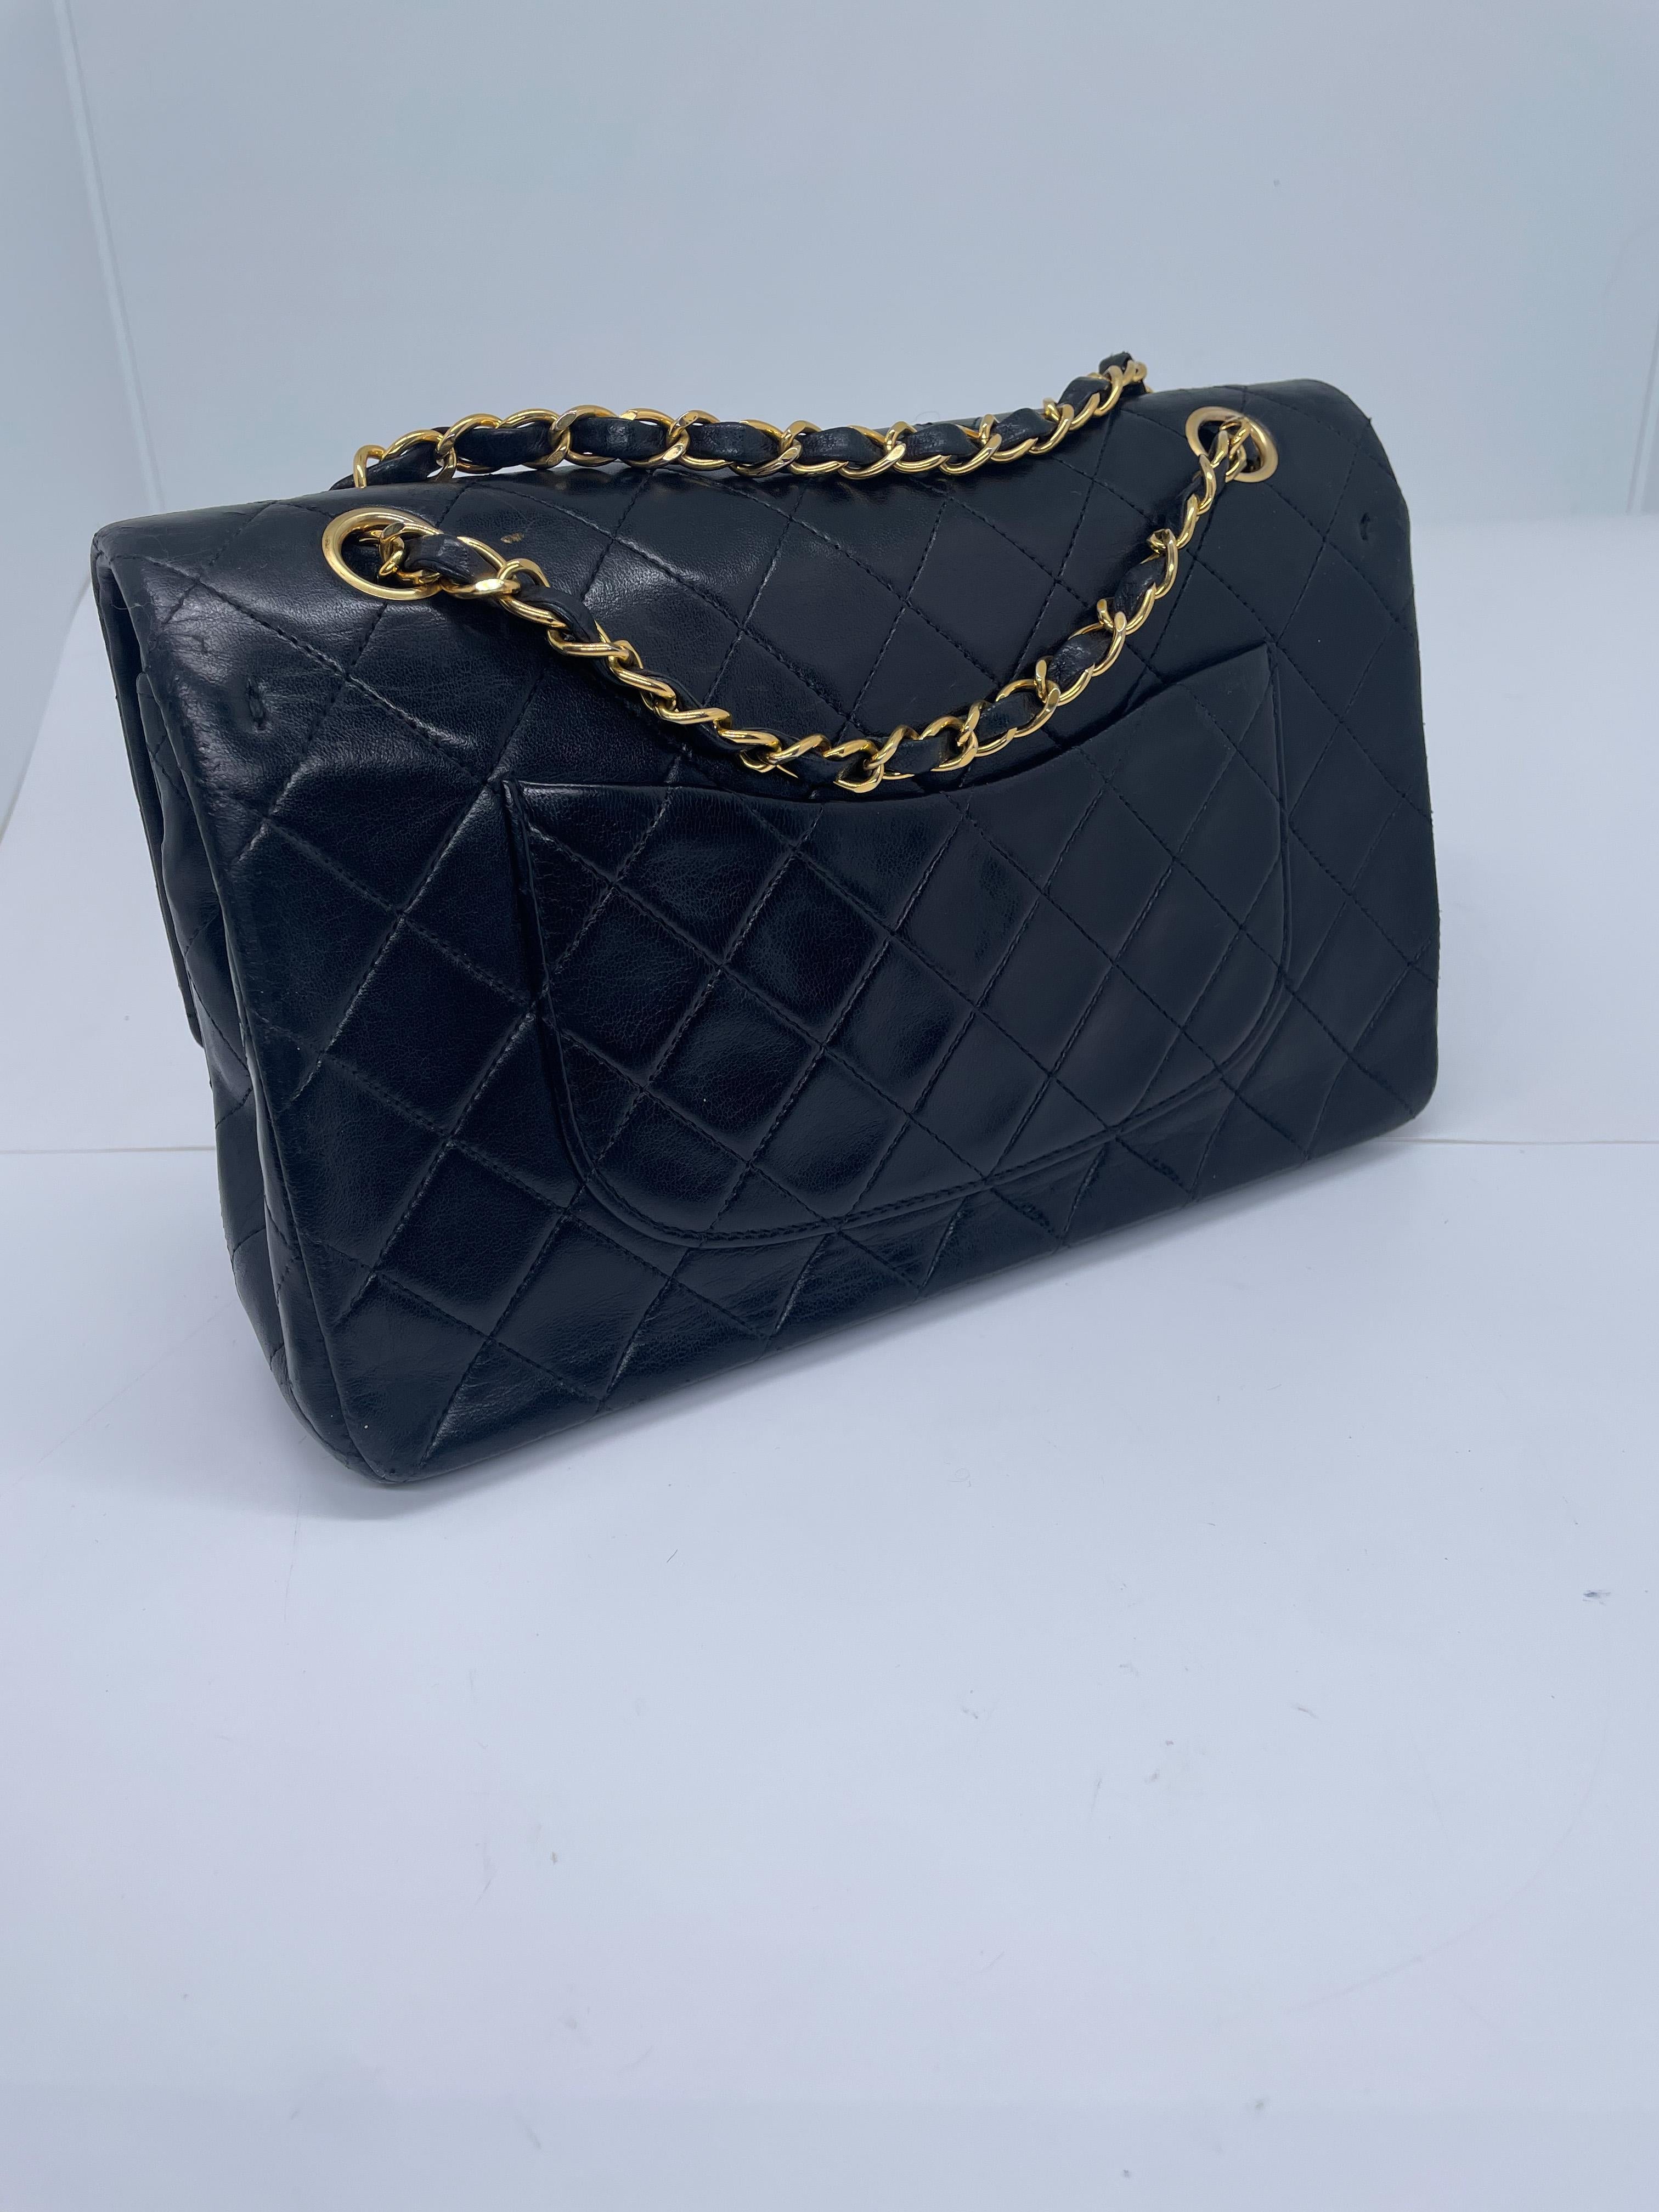 Chanel Classique handbag in black lambskin and 24-carat plated gold metal For Sale 2